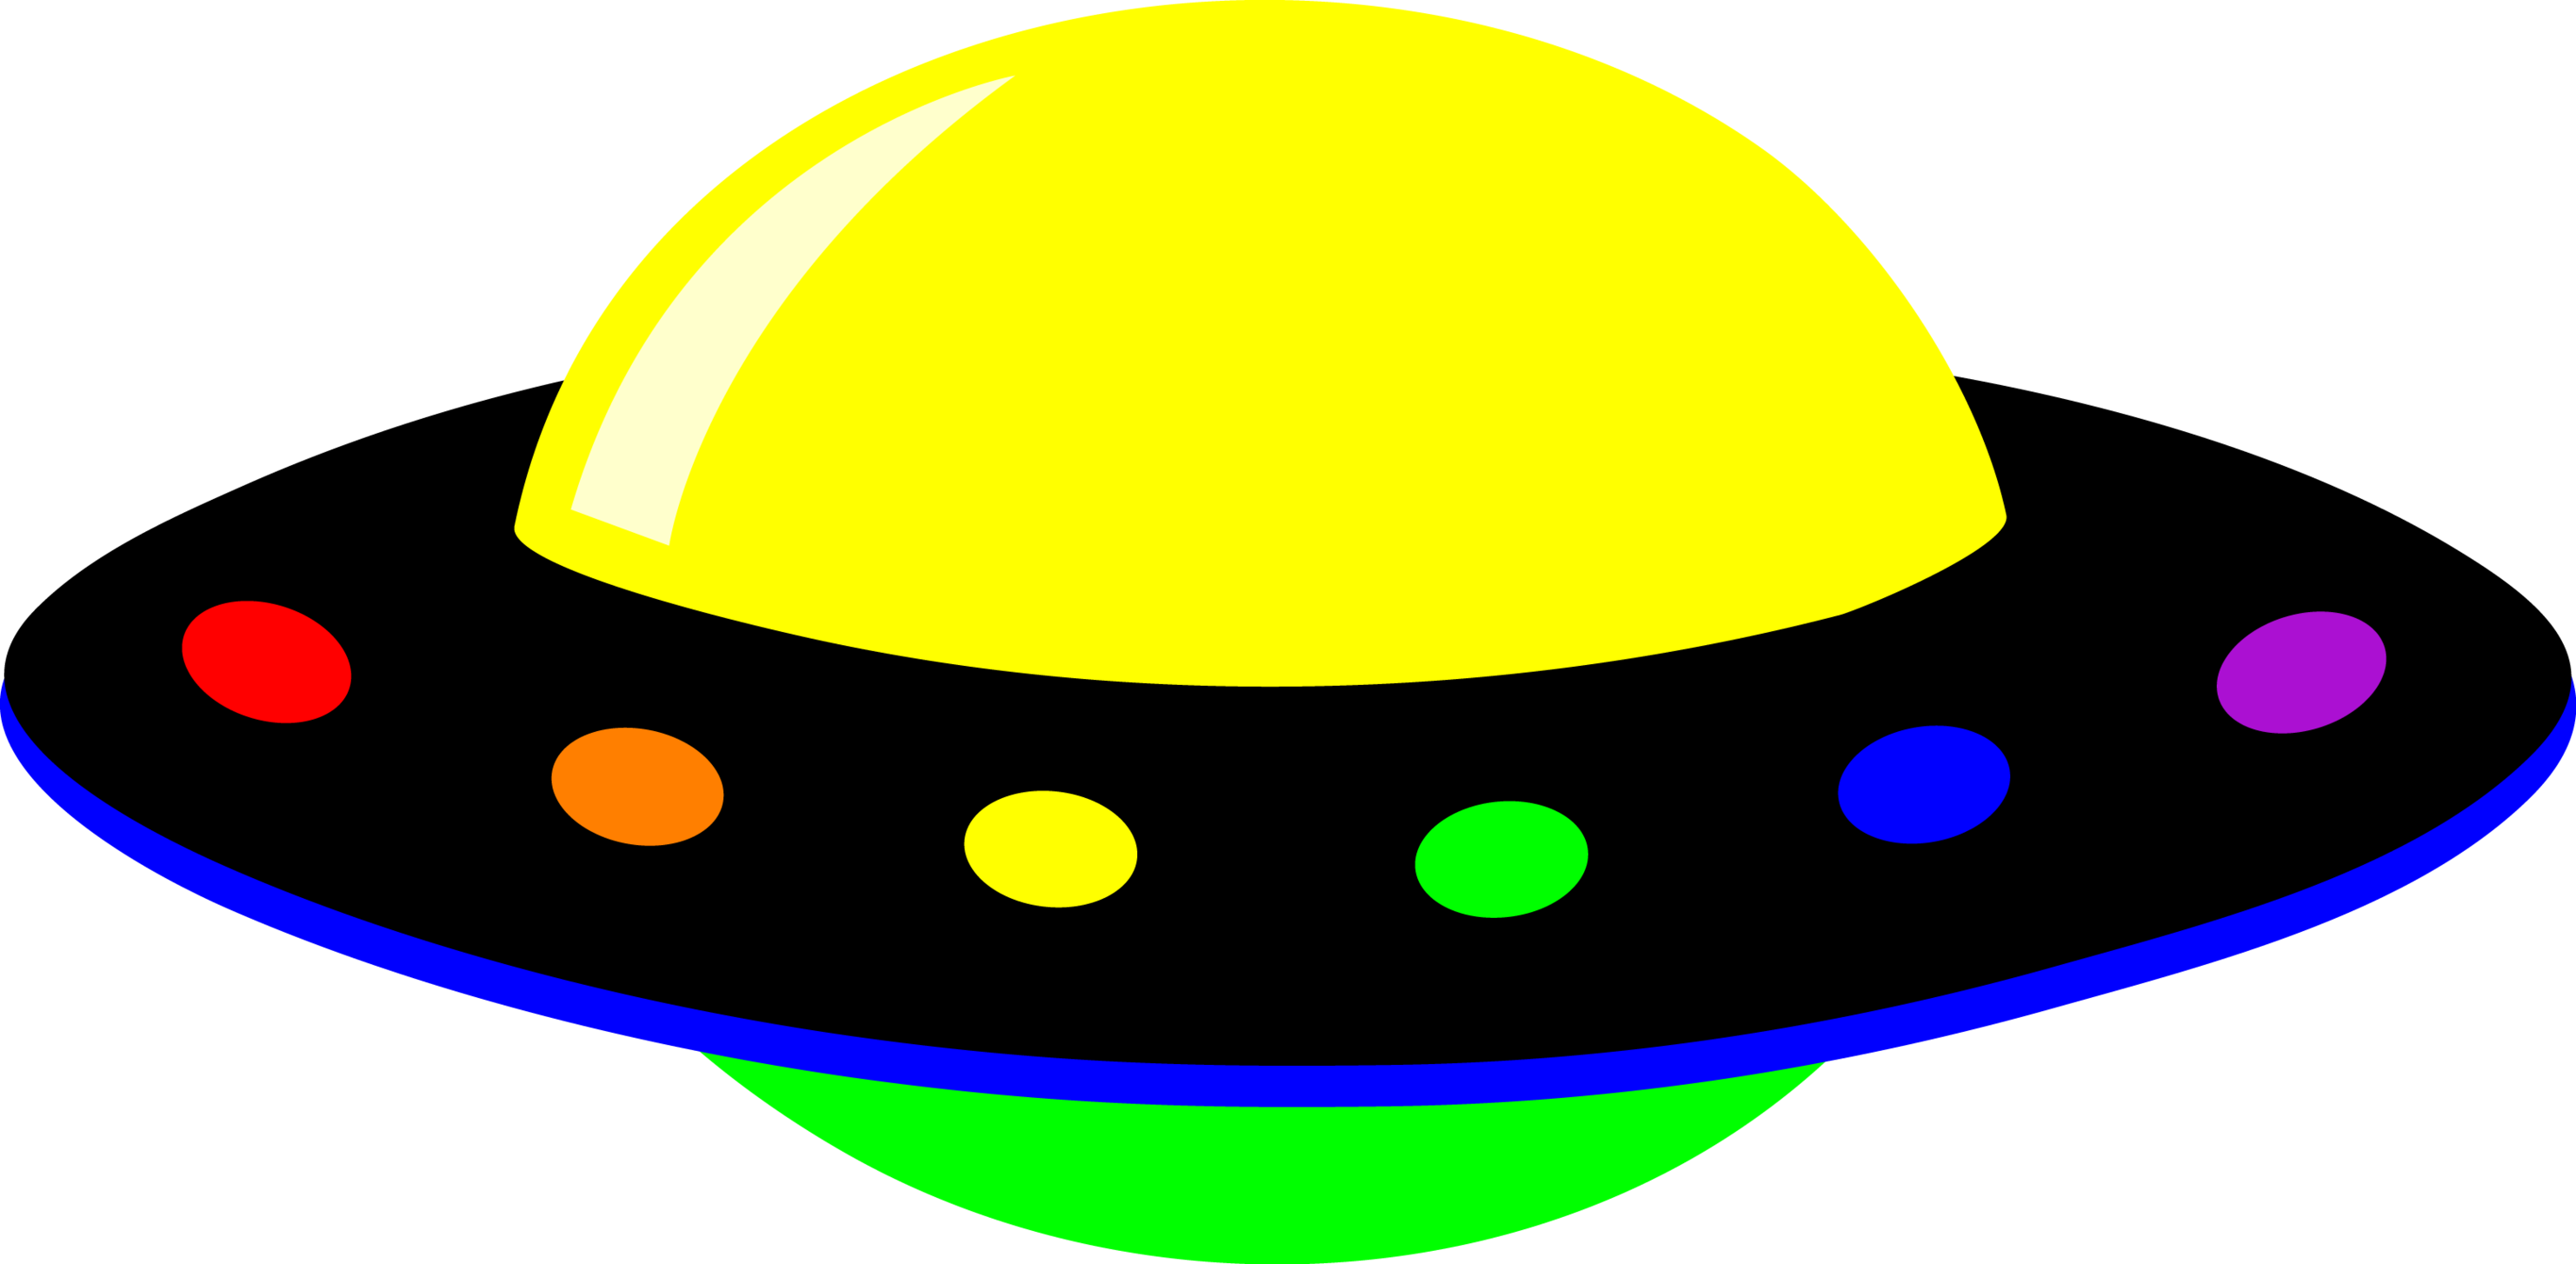 Alien In A Spaceship Clip Art Clipart - Free to use Clip Art Resource